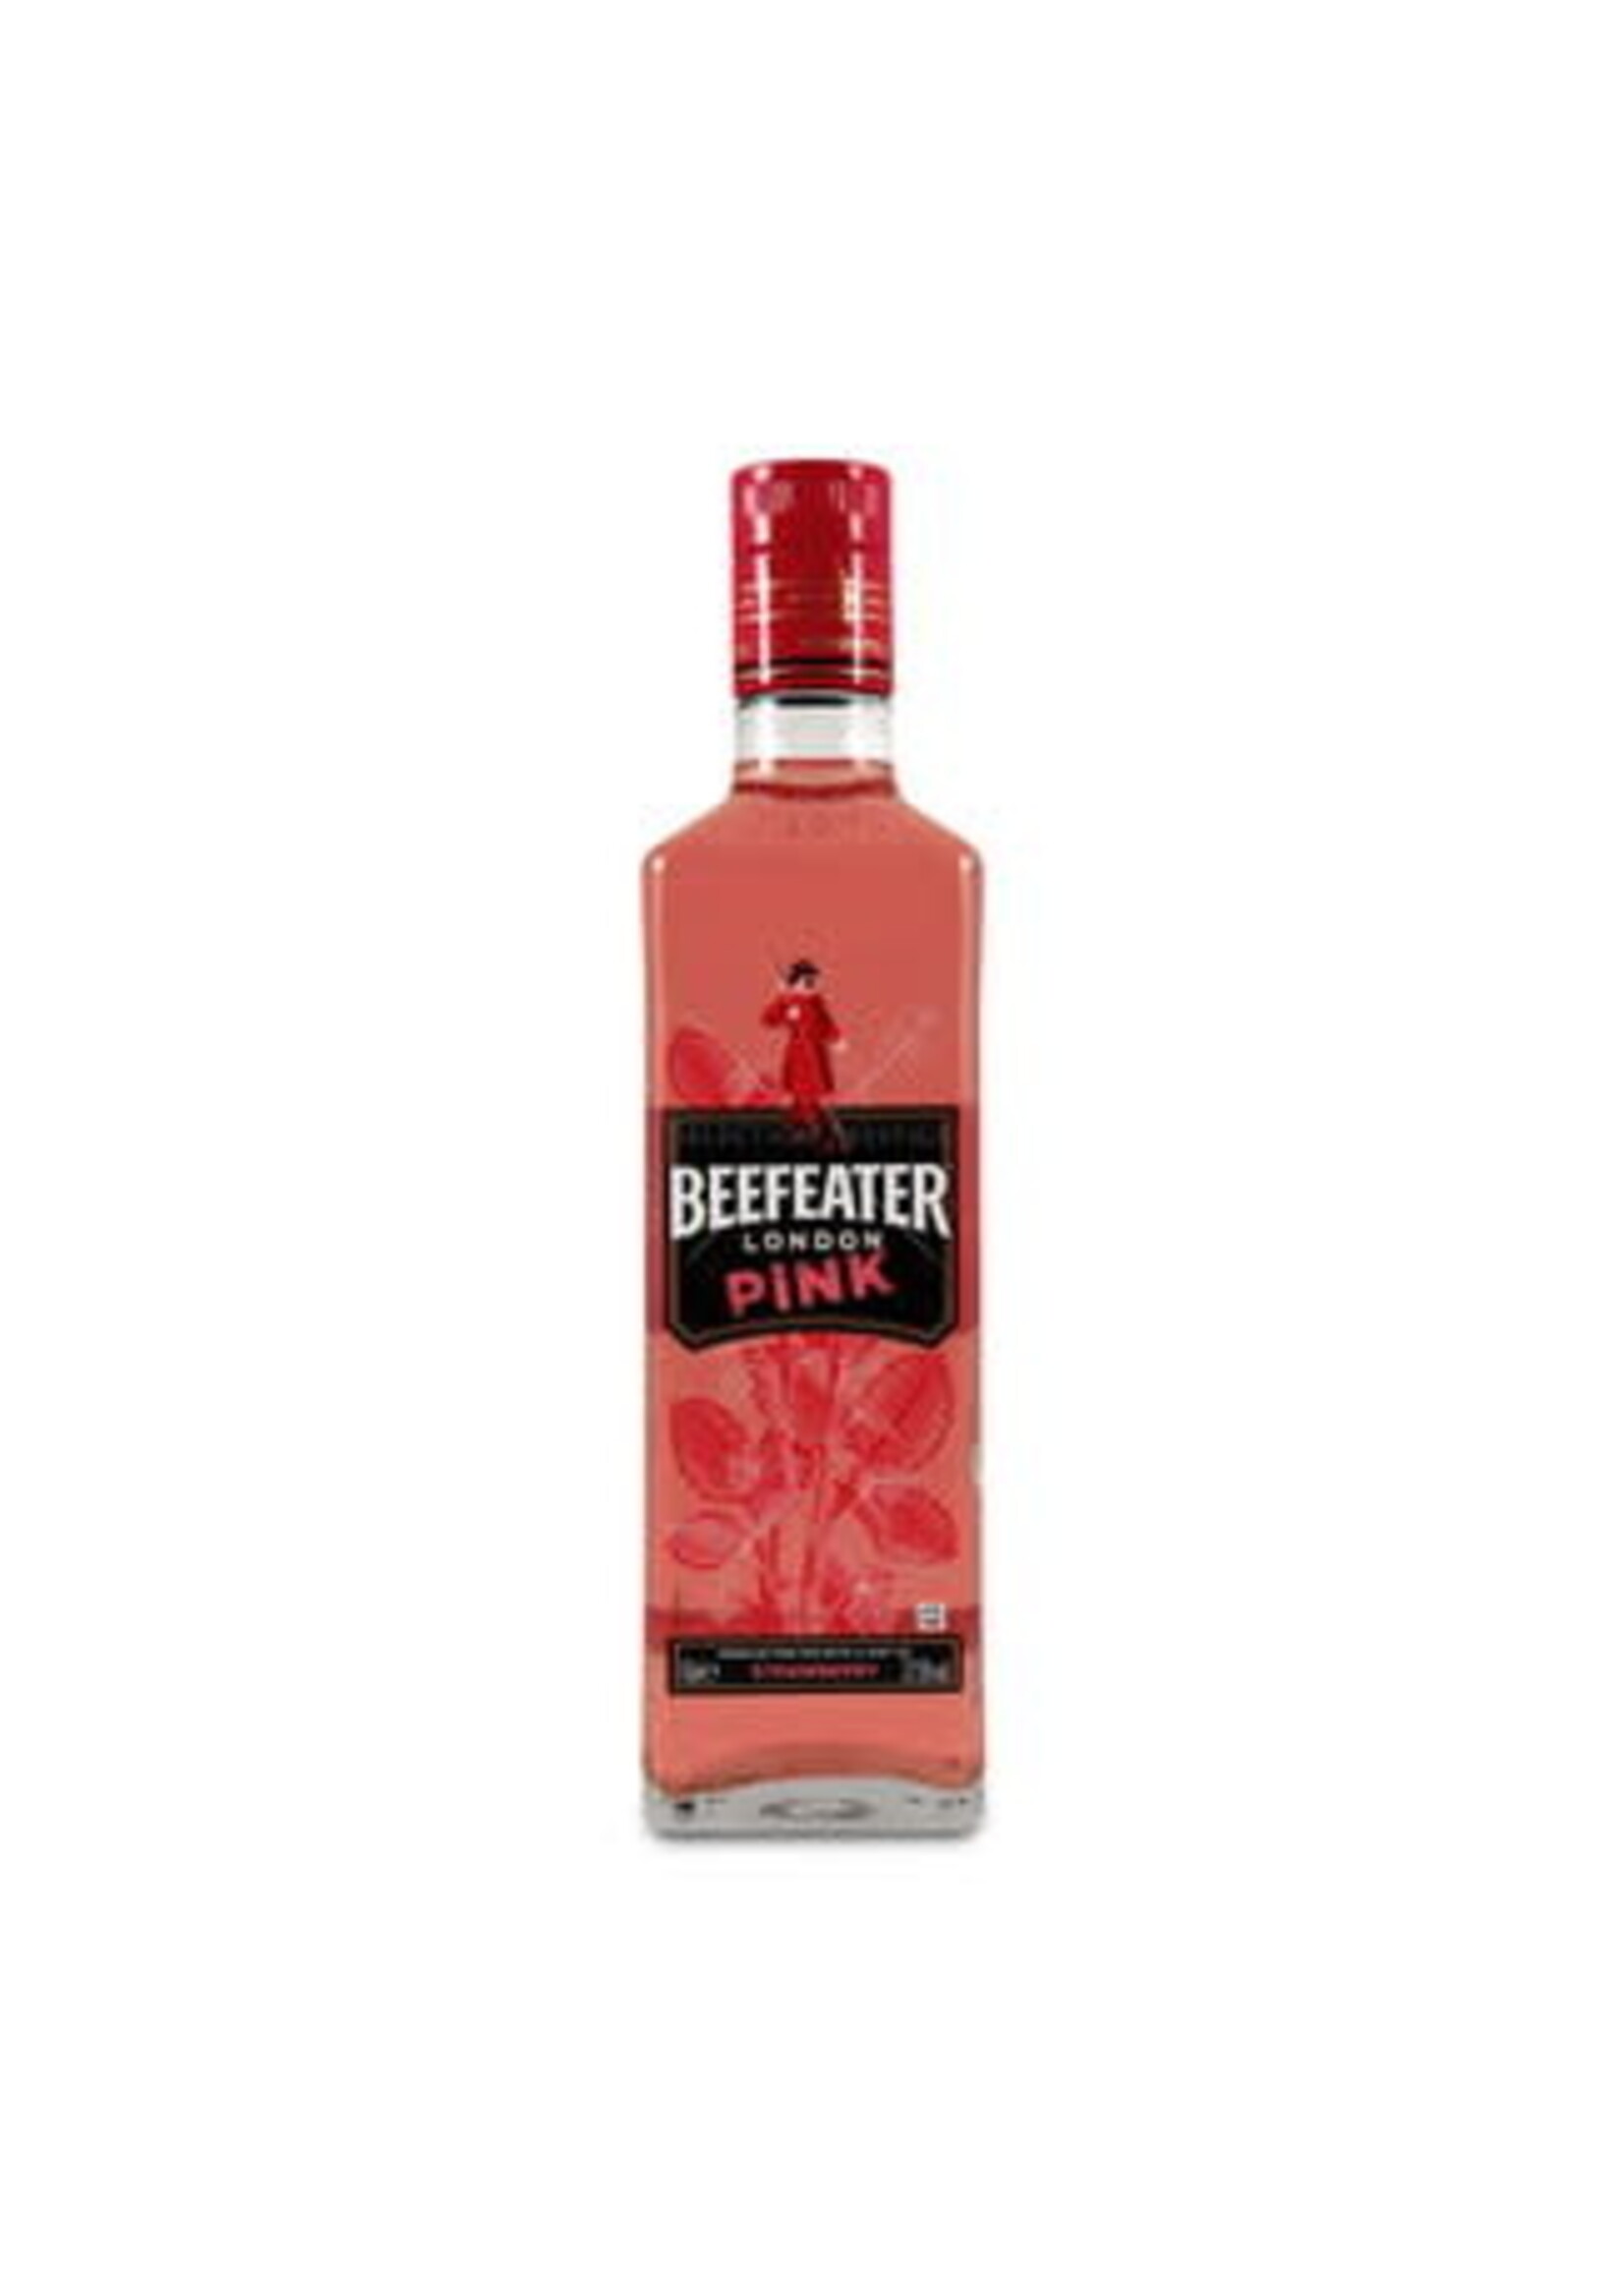 Beefeater Beefeater London Pink Strawberry 70 cl